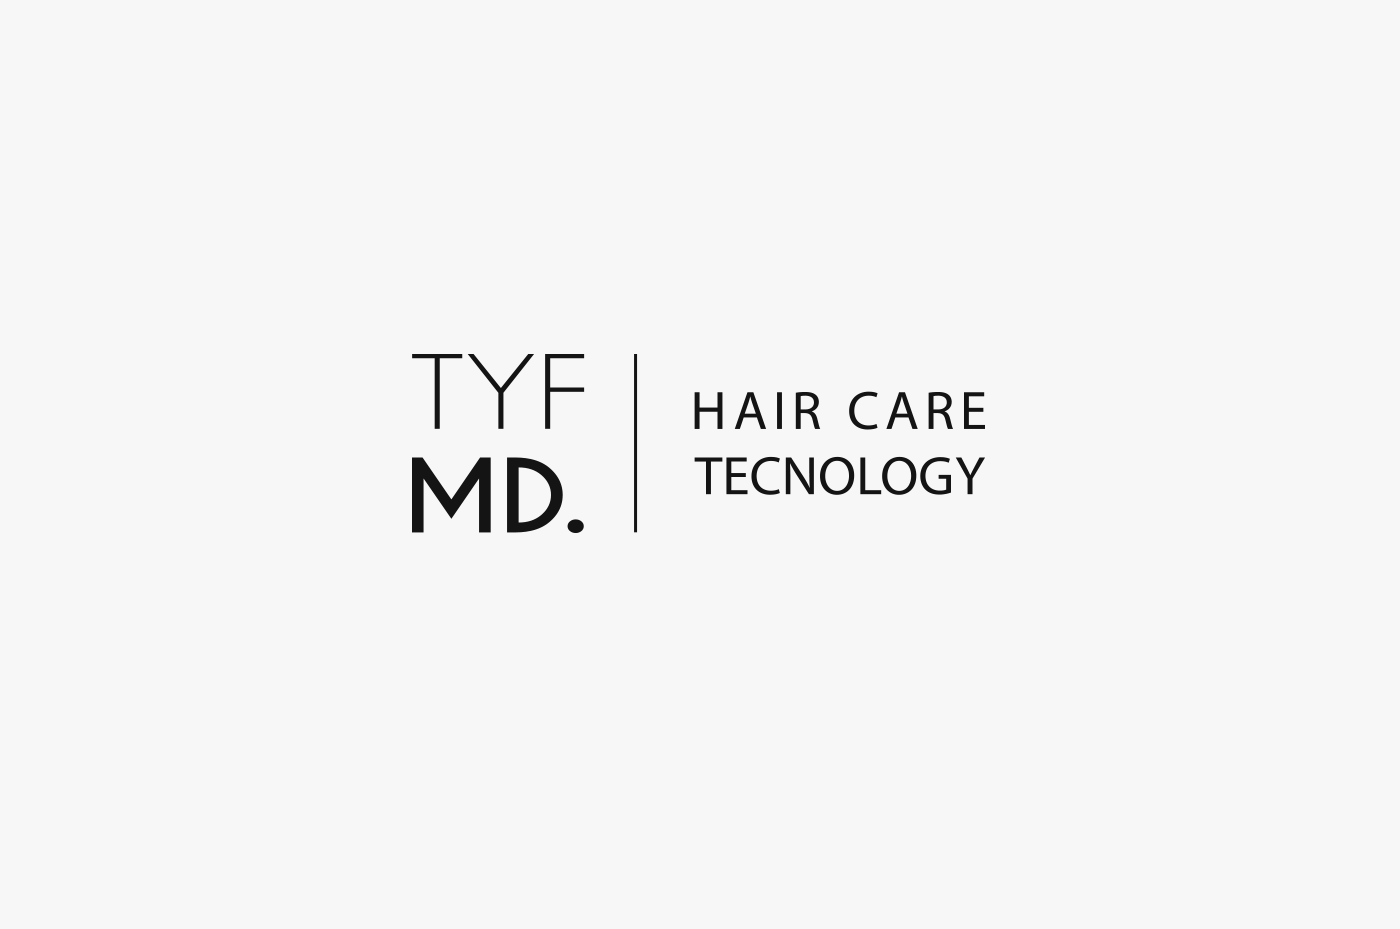 TYF MD. haircare product natural shampoo organic styling 